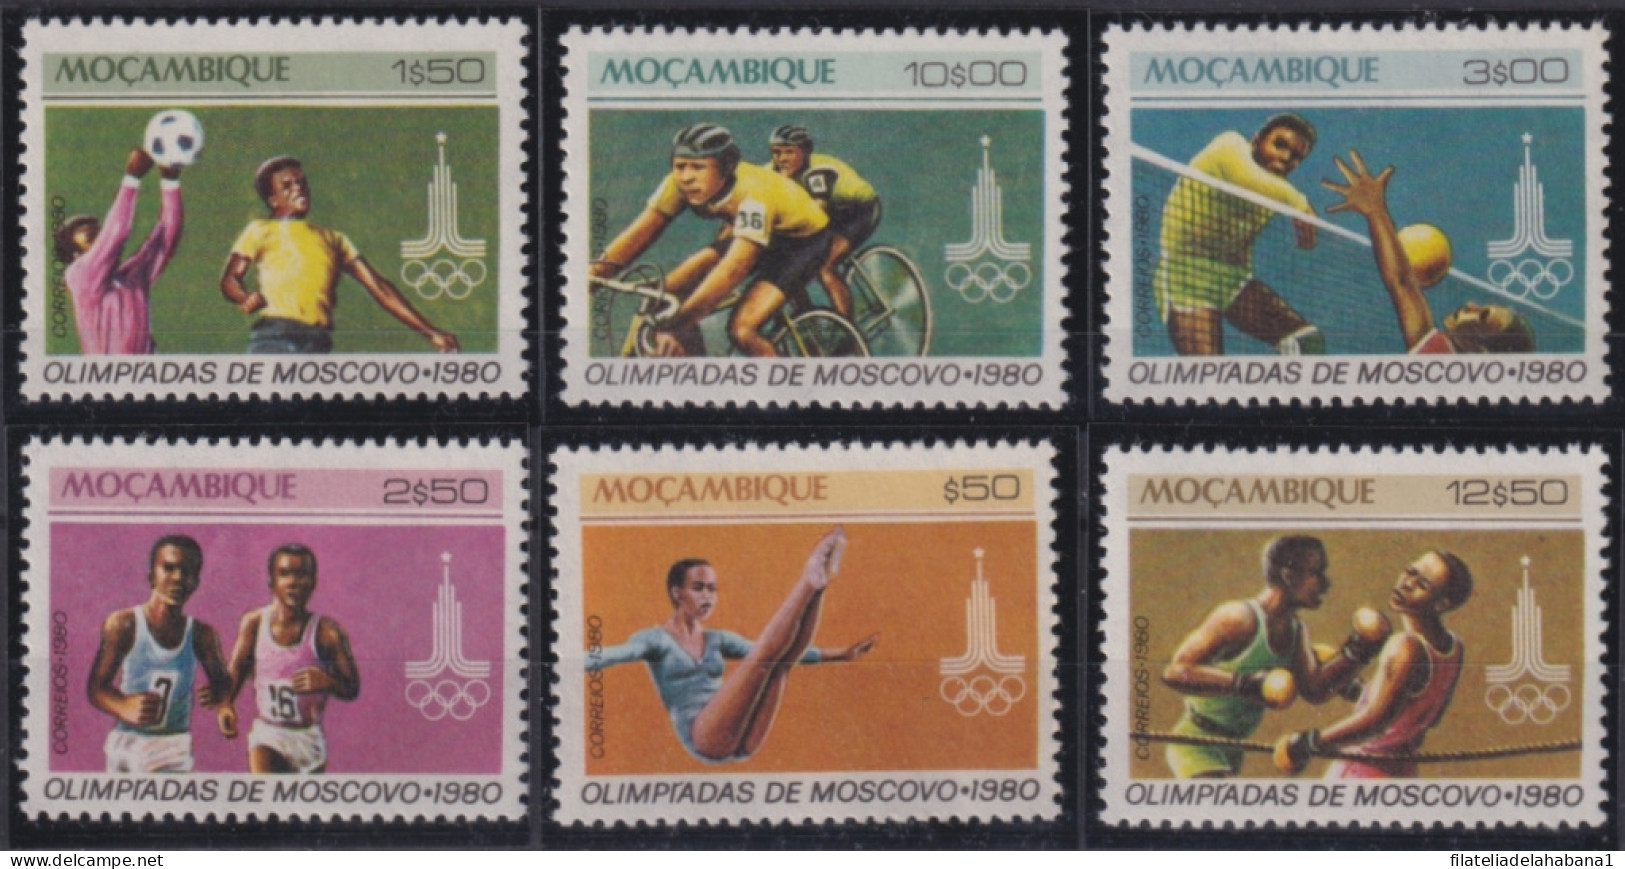 F-EX50250 MOZAMBIQUE MNH 1980 OLYMPIC GAMES MOSCOW CYCLING BOXING ATHLETISM BASKET.  - Ete 1980: Moscou